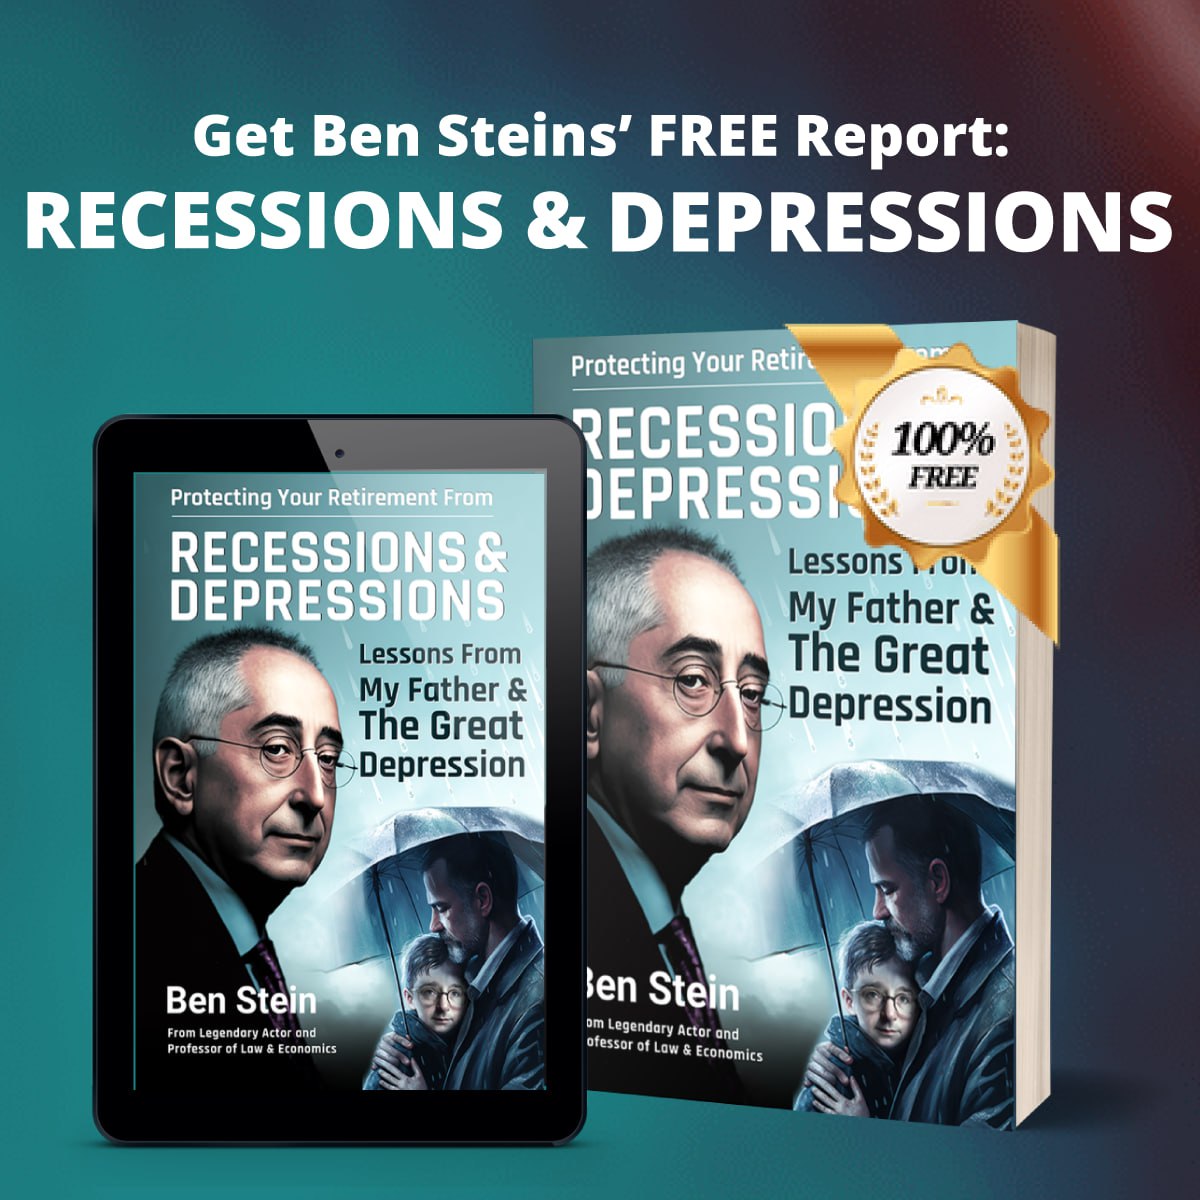 This is a must-read for anyone with an IRA, 401k, TSP Pension, or even a savings account: https://t.co/896Y1Cp3Cy

Ben Stein lays out his top hacks to protect your retirement that he learned from his father and the Great Depression. 

I recommend you get his FREE report to… https://t.co/hTr56Br2dN https://t.co/HiIqEzTcBB